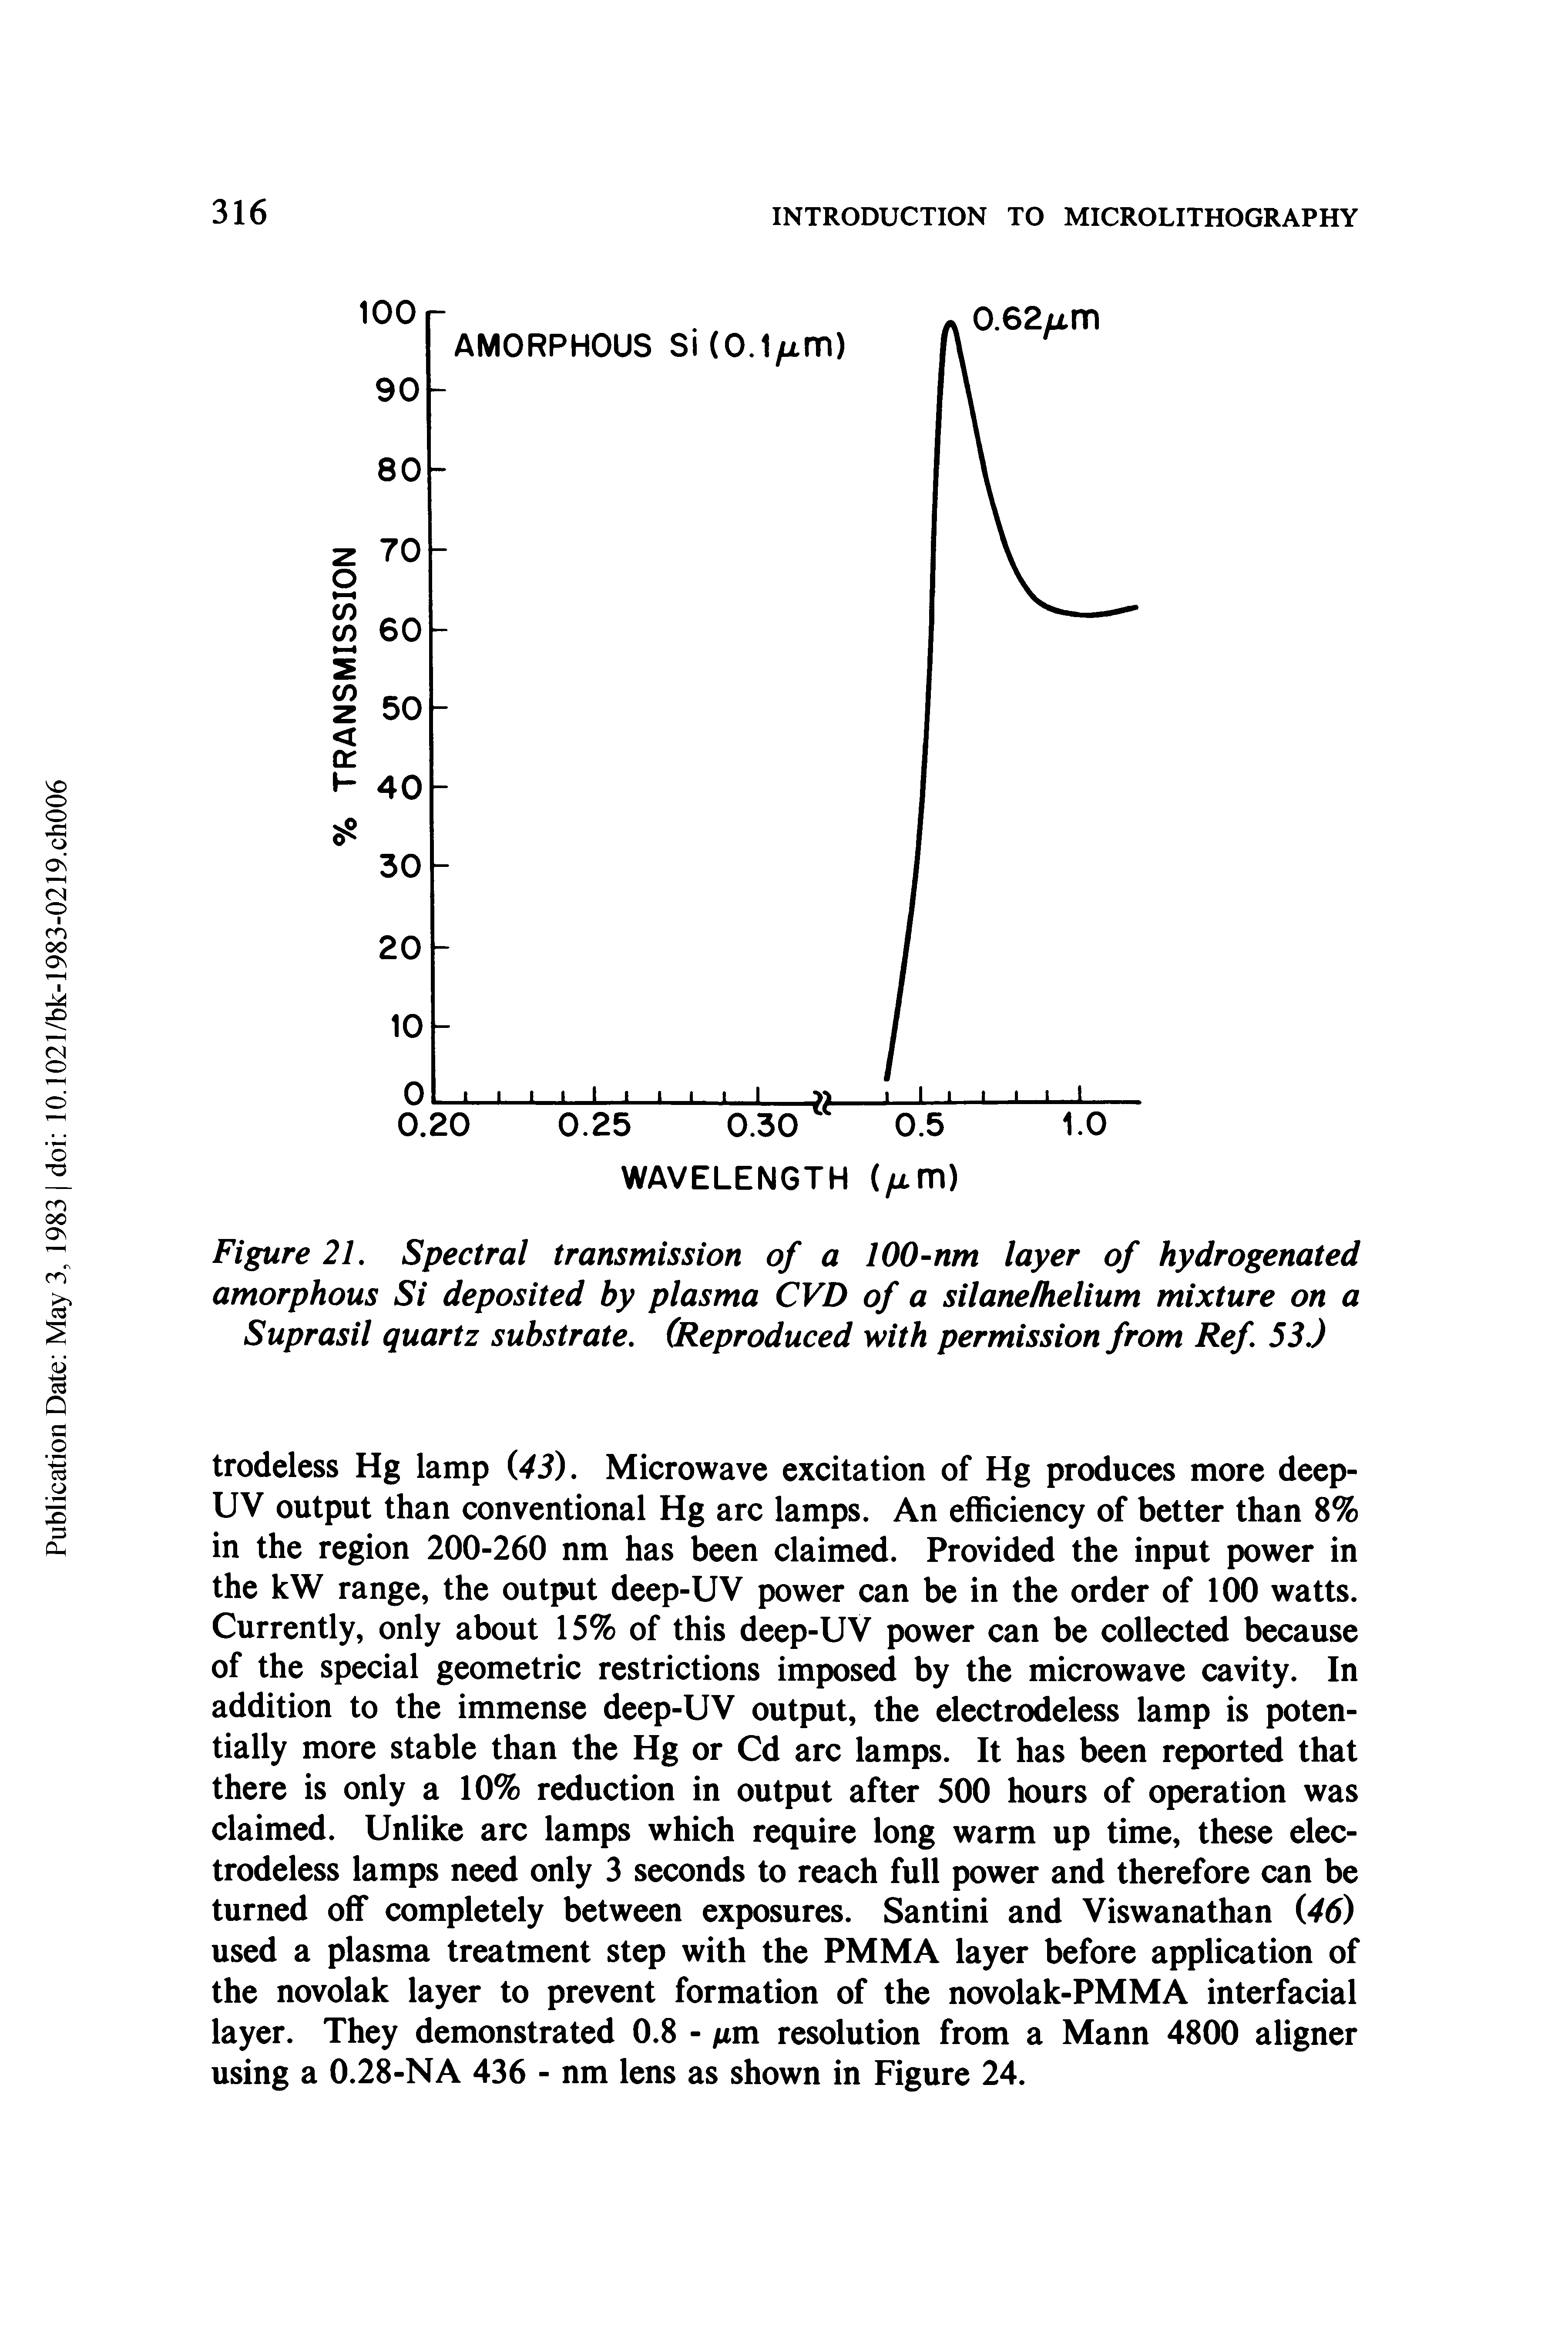 Figure 21. Spectral transmission of a 100-nm layer of hydrogenated amorphous Si deposited by plasma CVD of a silanethelium mixture on a Suprasil quartz substrate. (Reproduced with permission from Ref. 53.)...